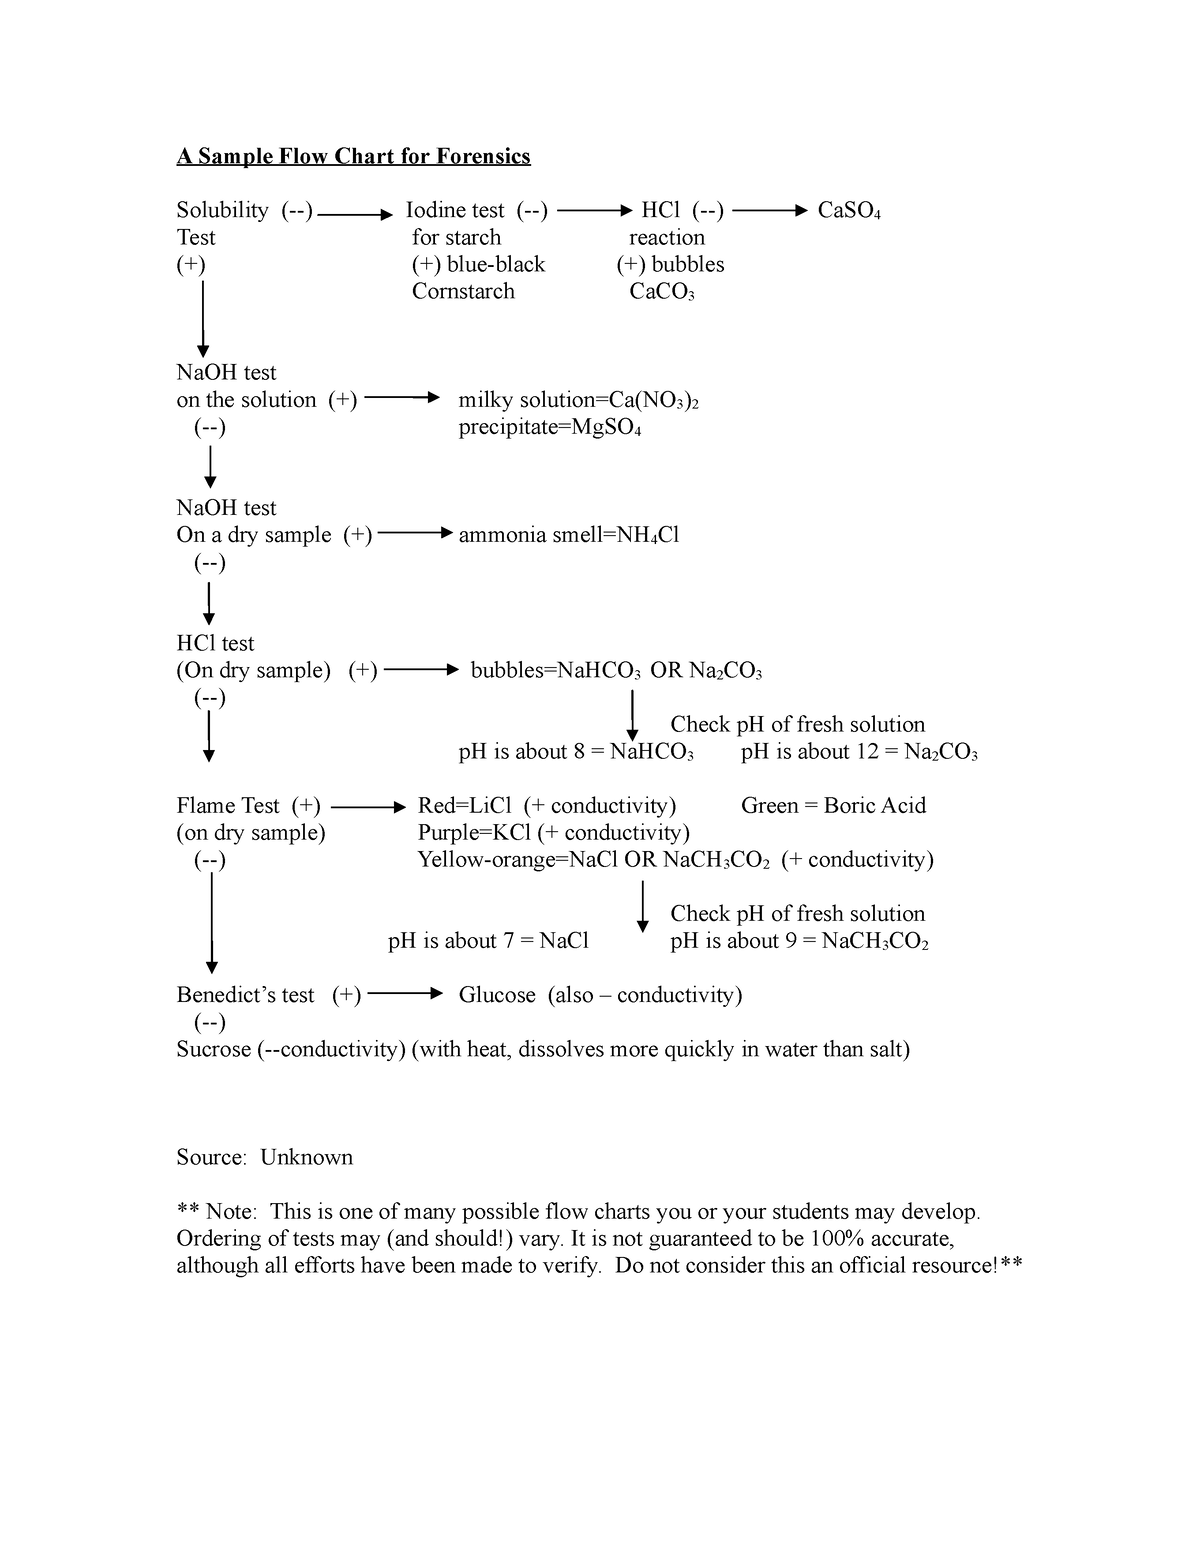 Sample Flow Chart for Forensics Clinic 2022 - A Sample Flow Chart for ...